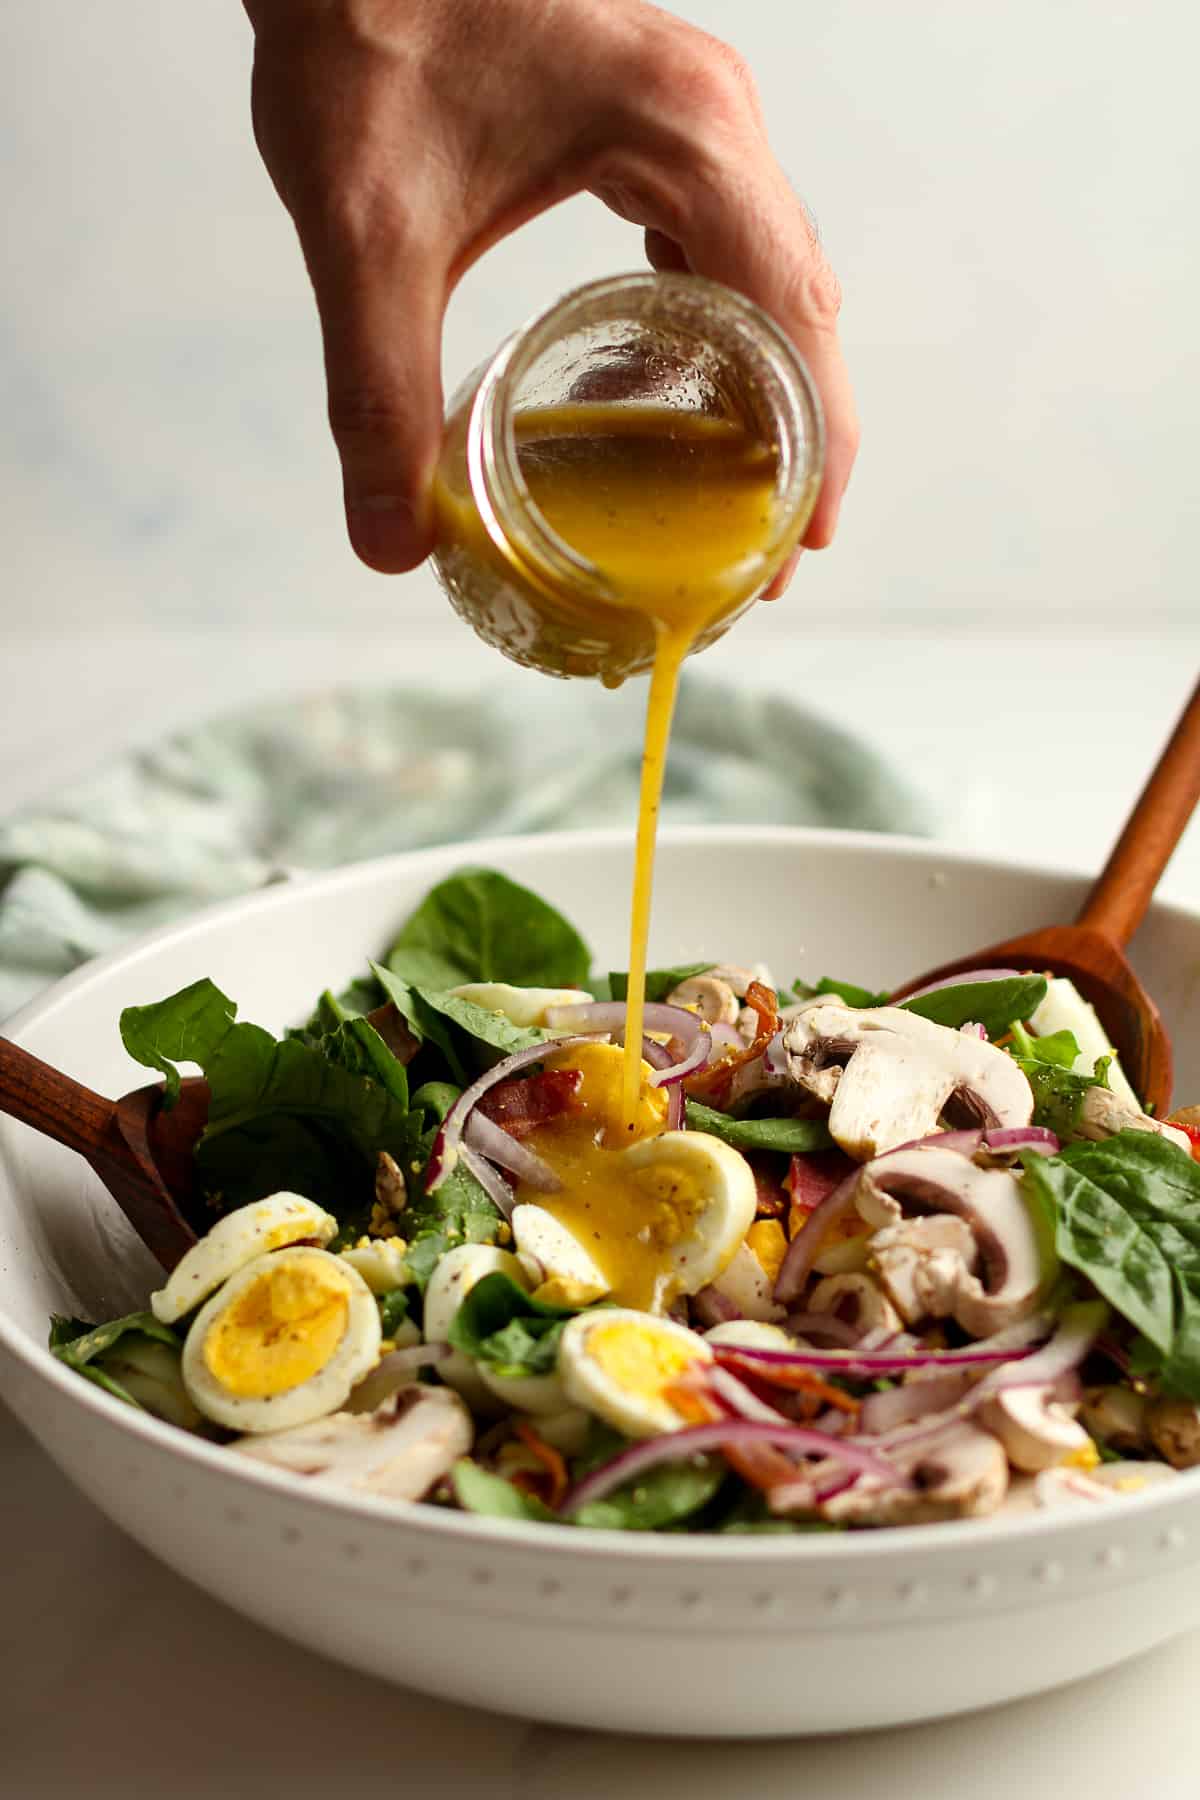 A hand drizzling a jar of Honey Dijon Dressing on the spinach salad.